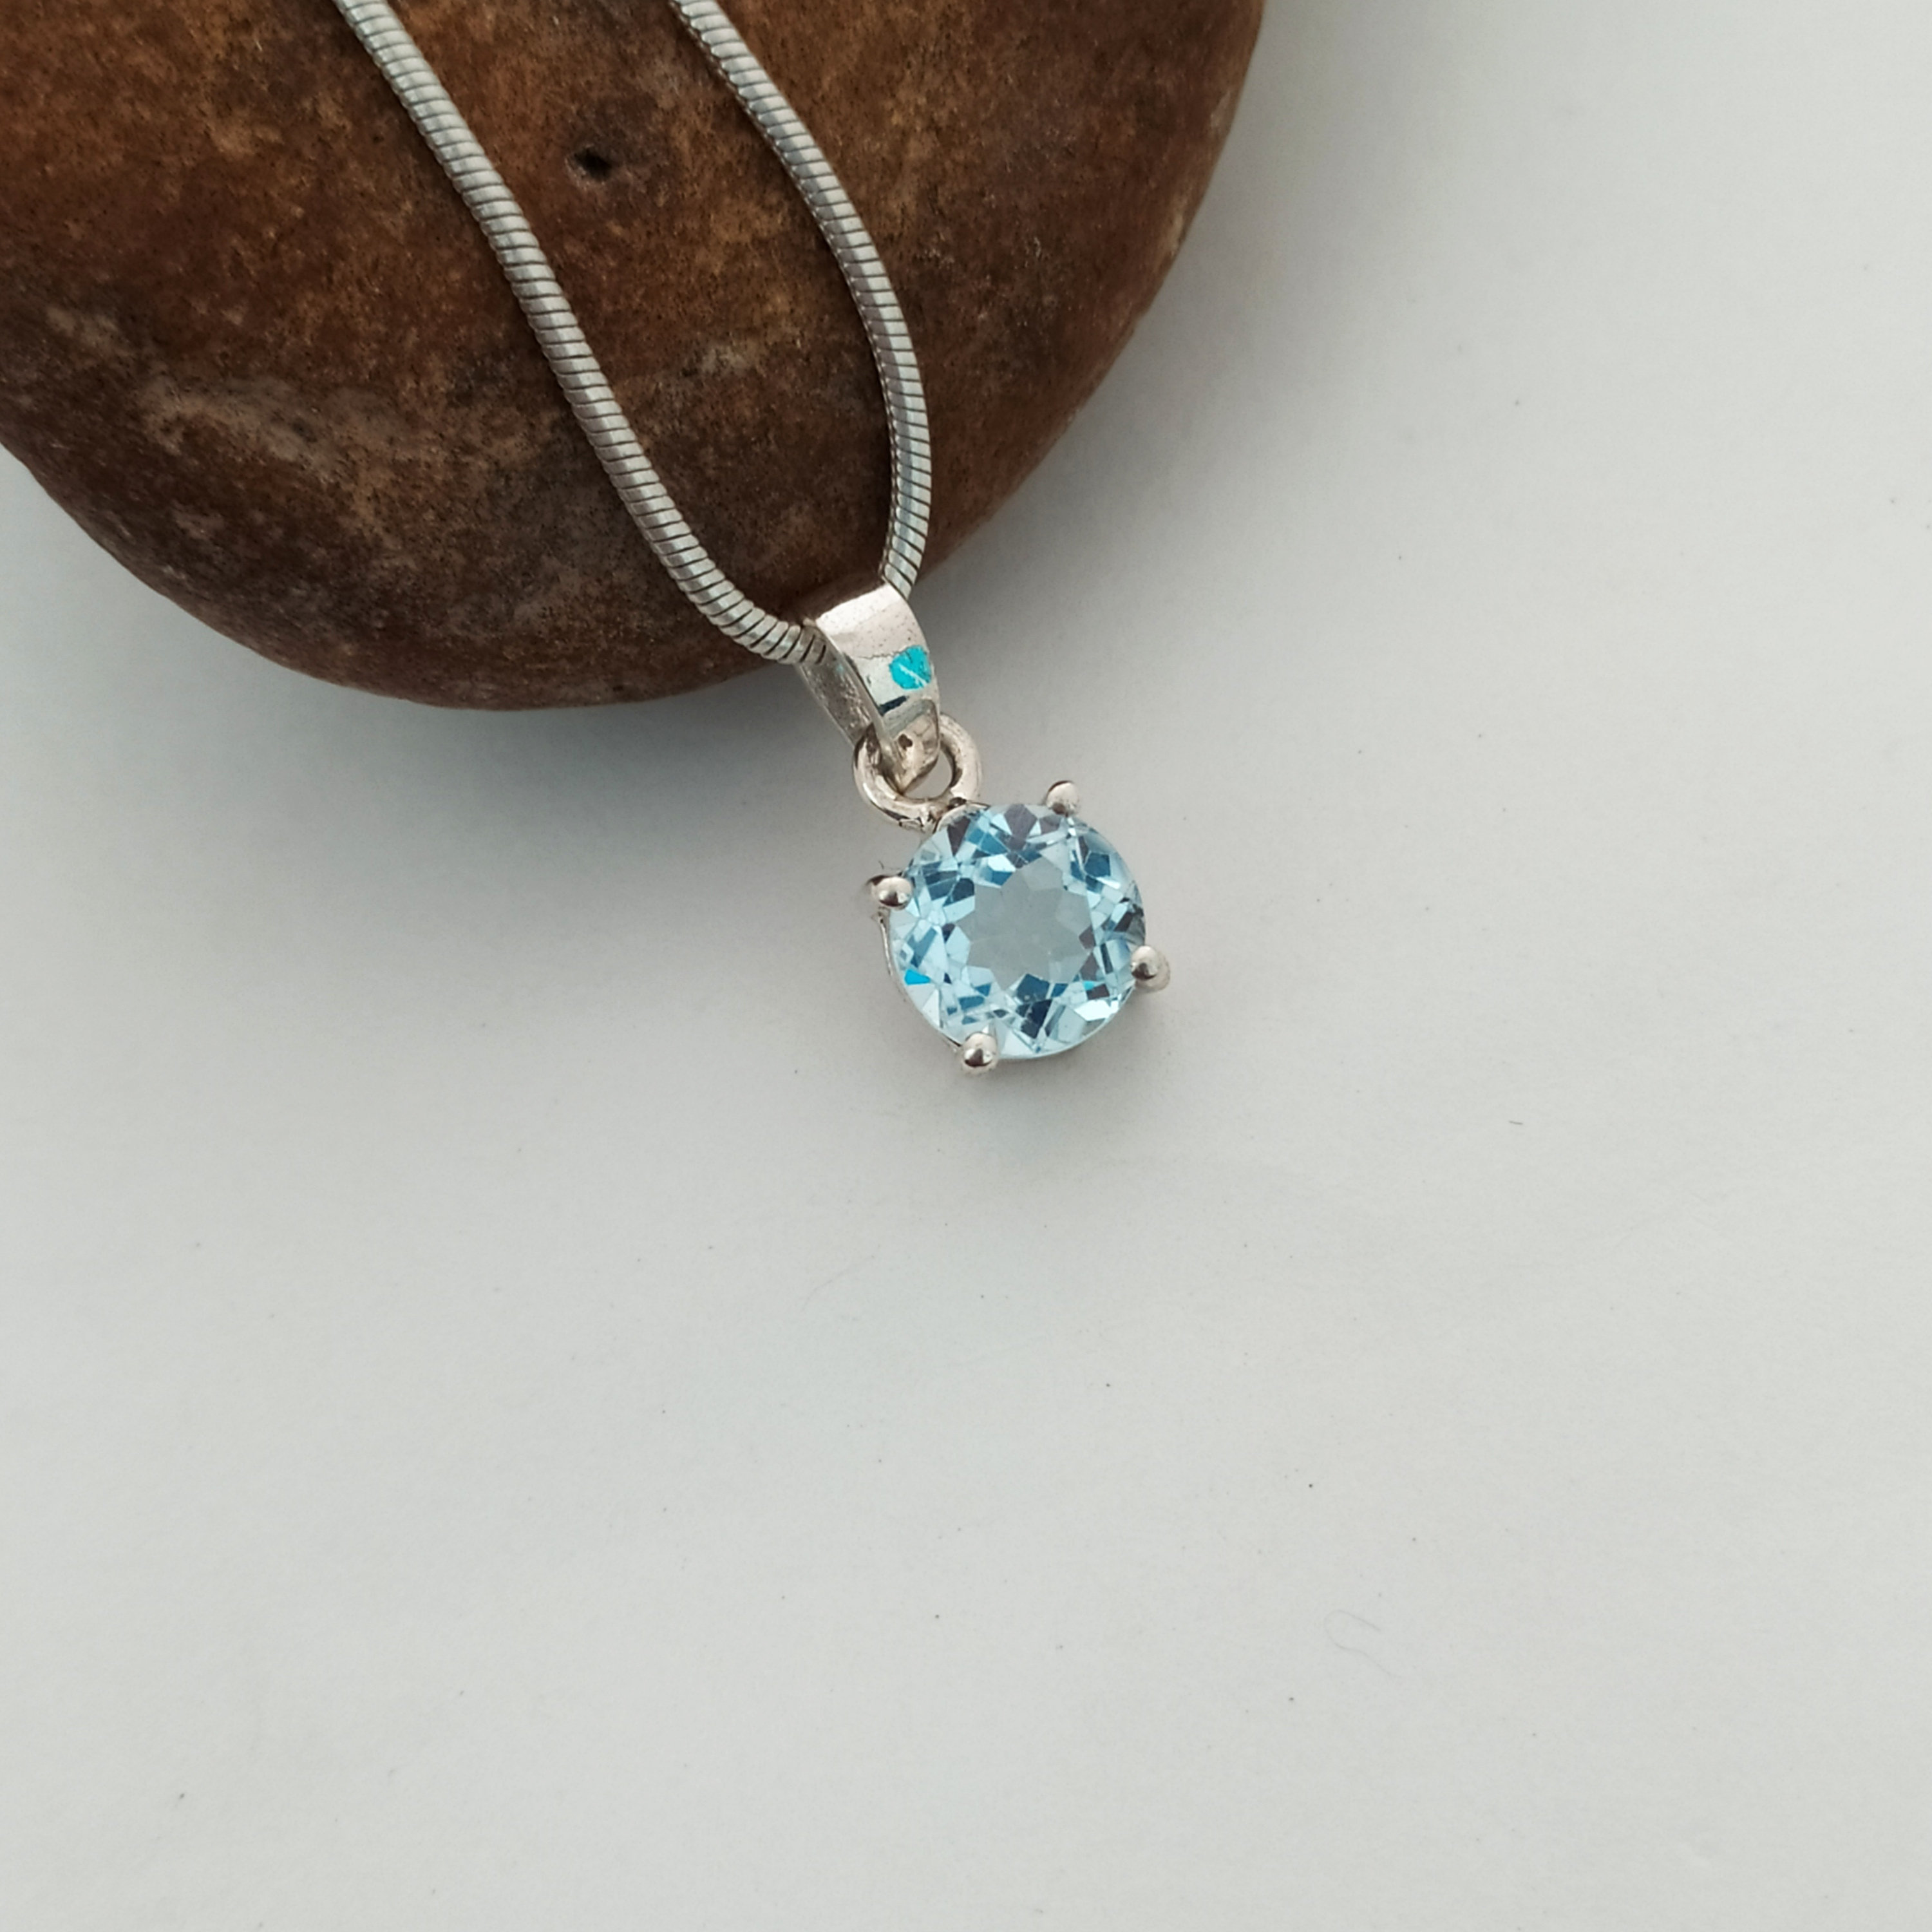 .01 cttw. 21mm x 14mm Solid 925 Sterling Silver Diamond and Sky Blue Topaz Pendant Charm